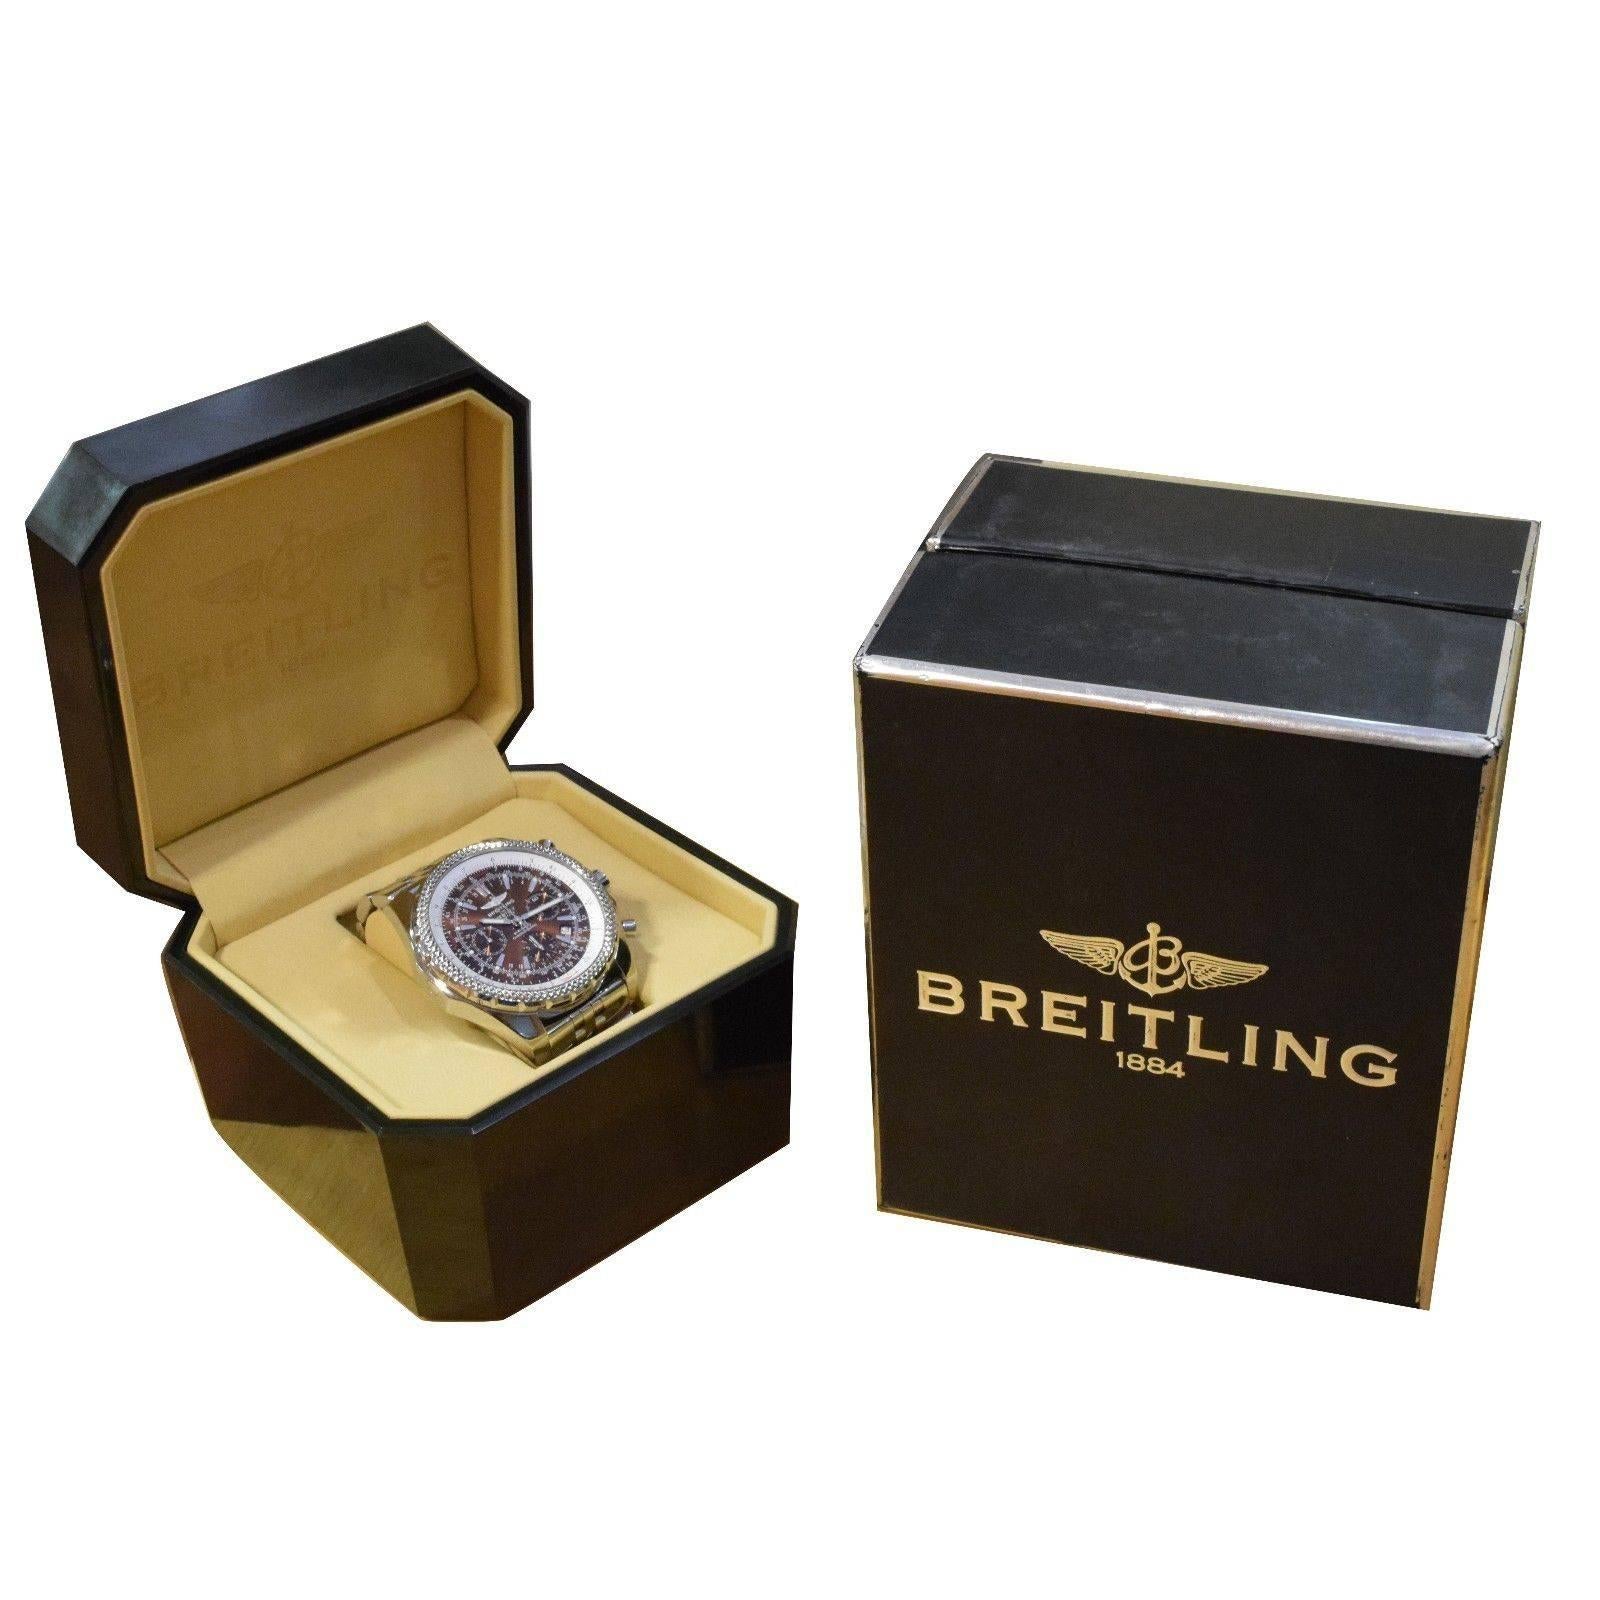 Breitling is a Swiss watchmaking brand that was founded in Grenchen, Switzerland in 1884. The brand is most known for its timekeeping devices used to aid aviators. The Breitling for Bentley Motors is one of the Classic Breitling for Bentley Models,